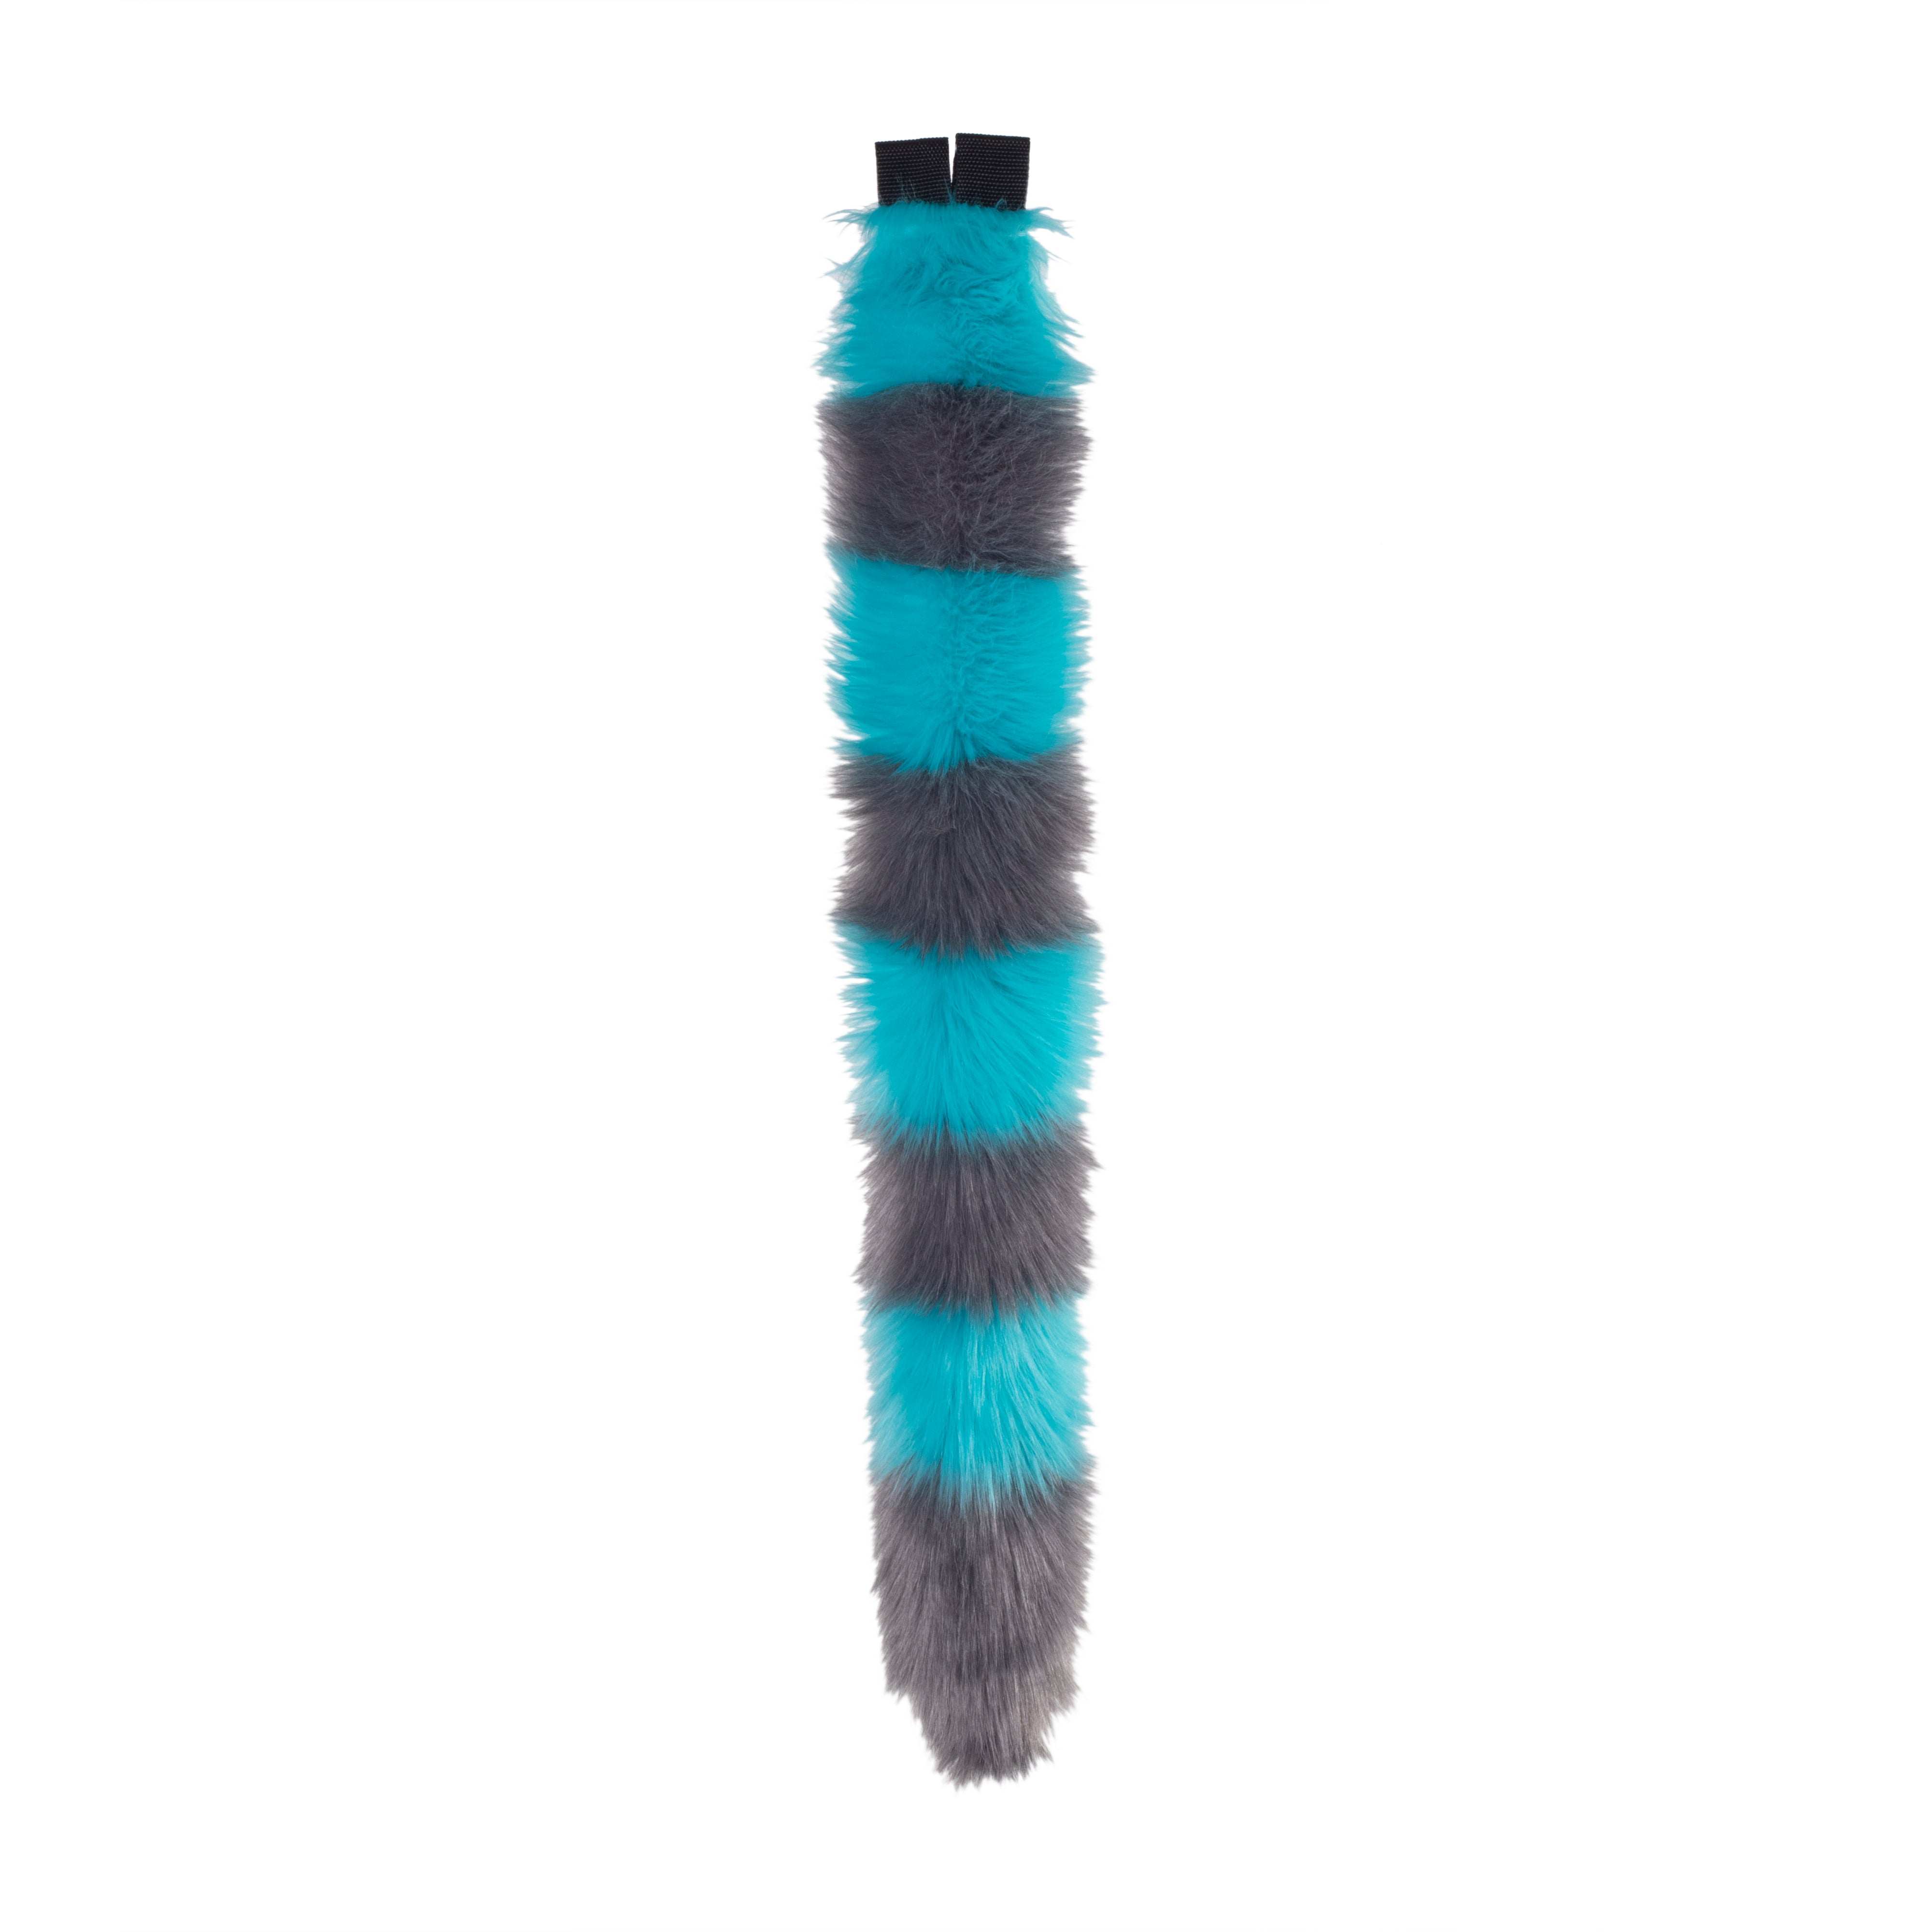 Pawstar Cheshire Striped Kitty Tail alice in wonderland furry fluffy partial fursuit halloween costume or cosplay accessory